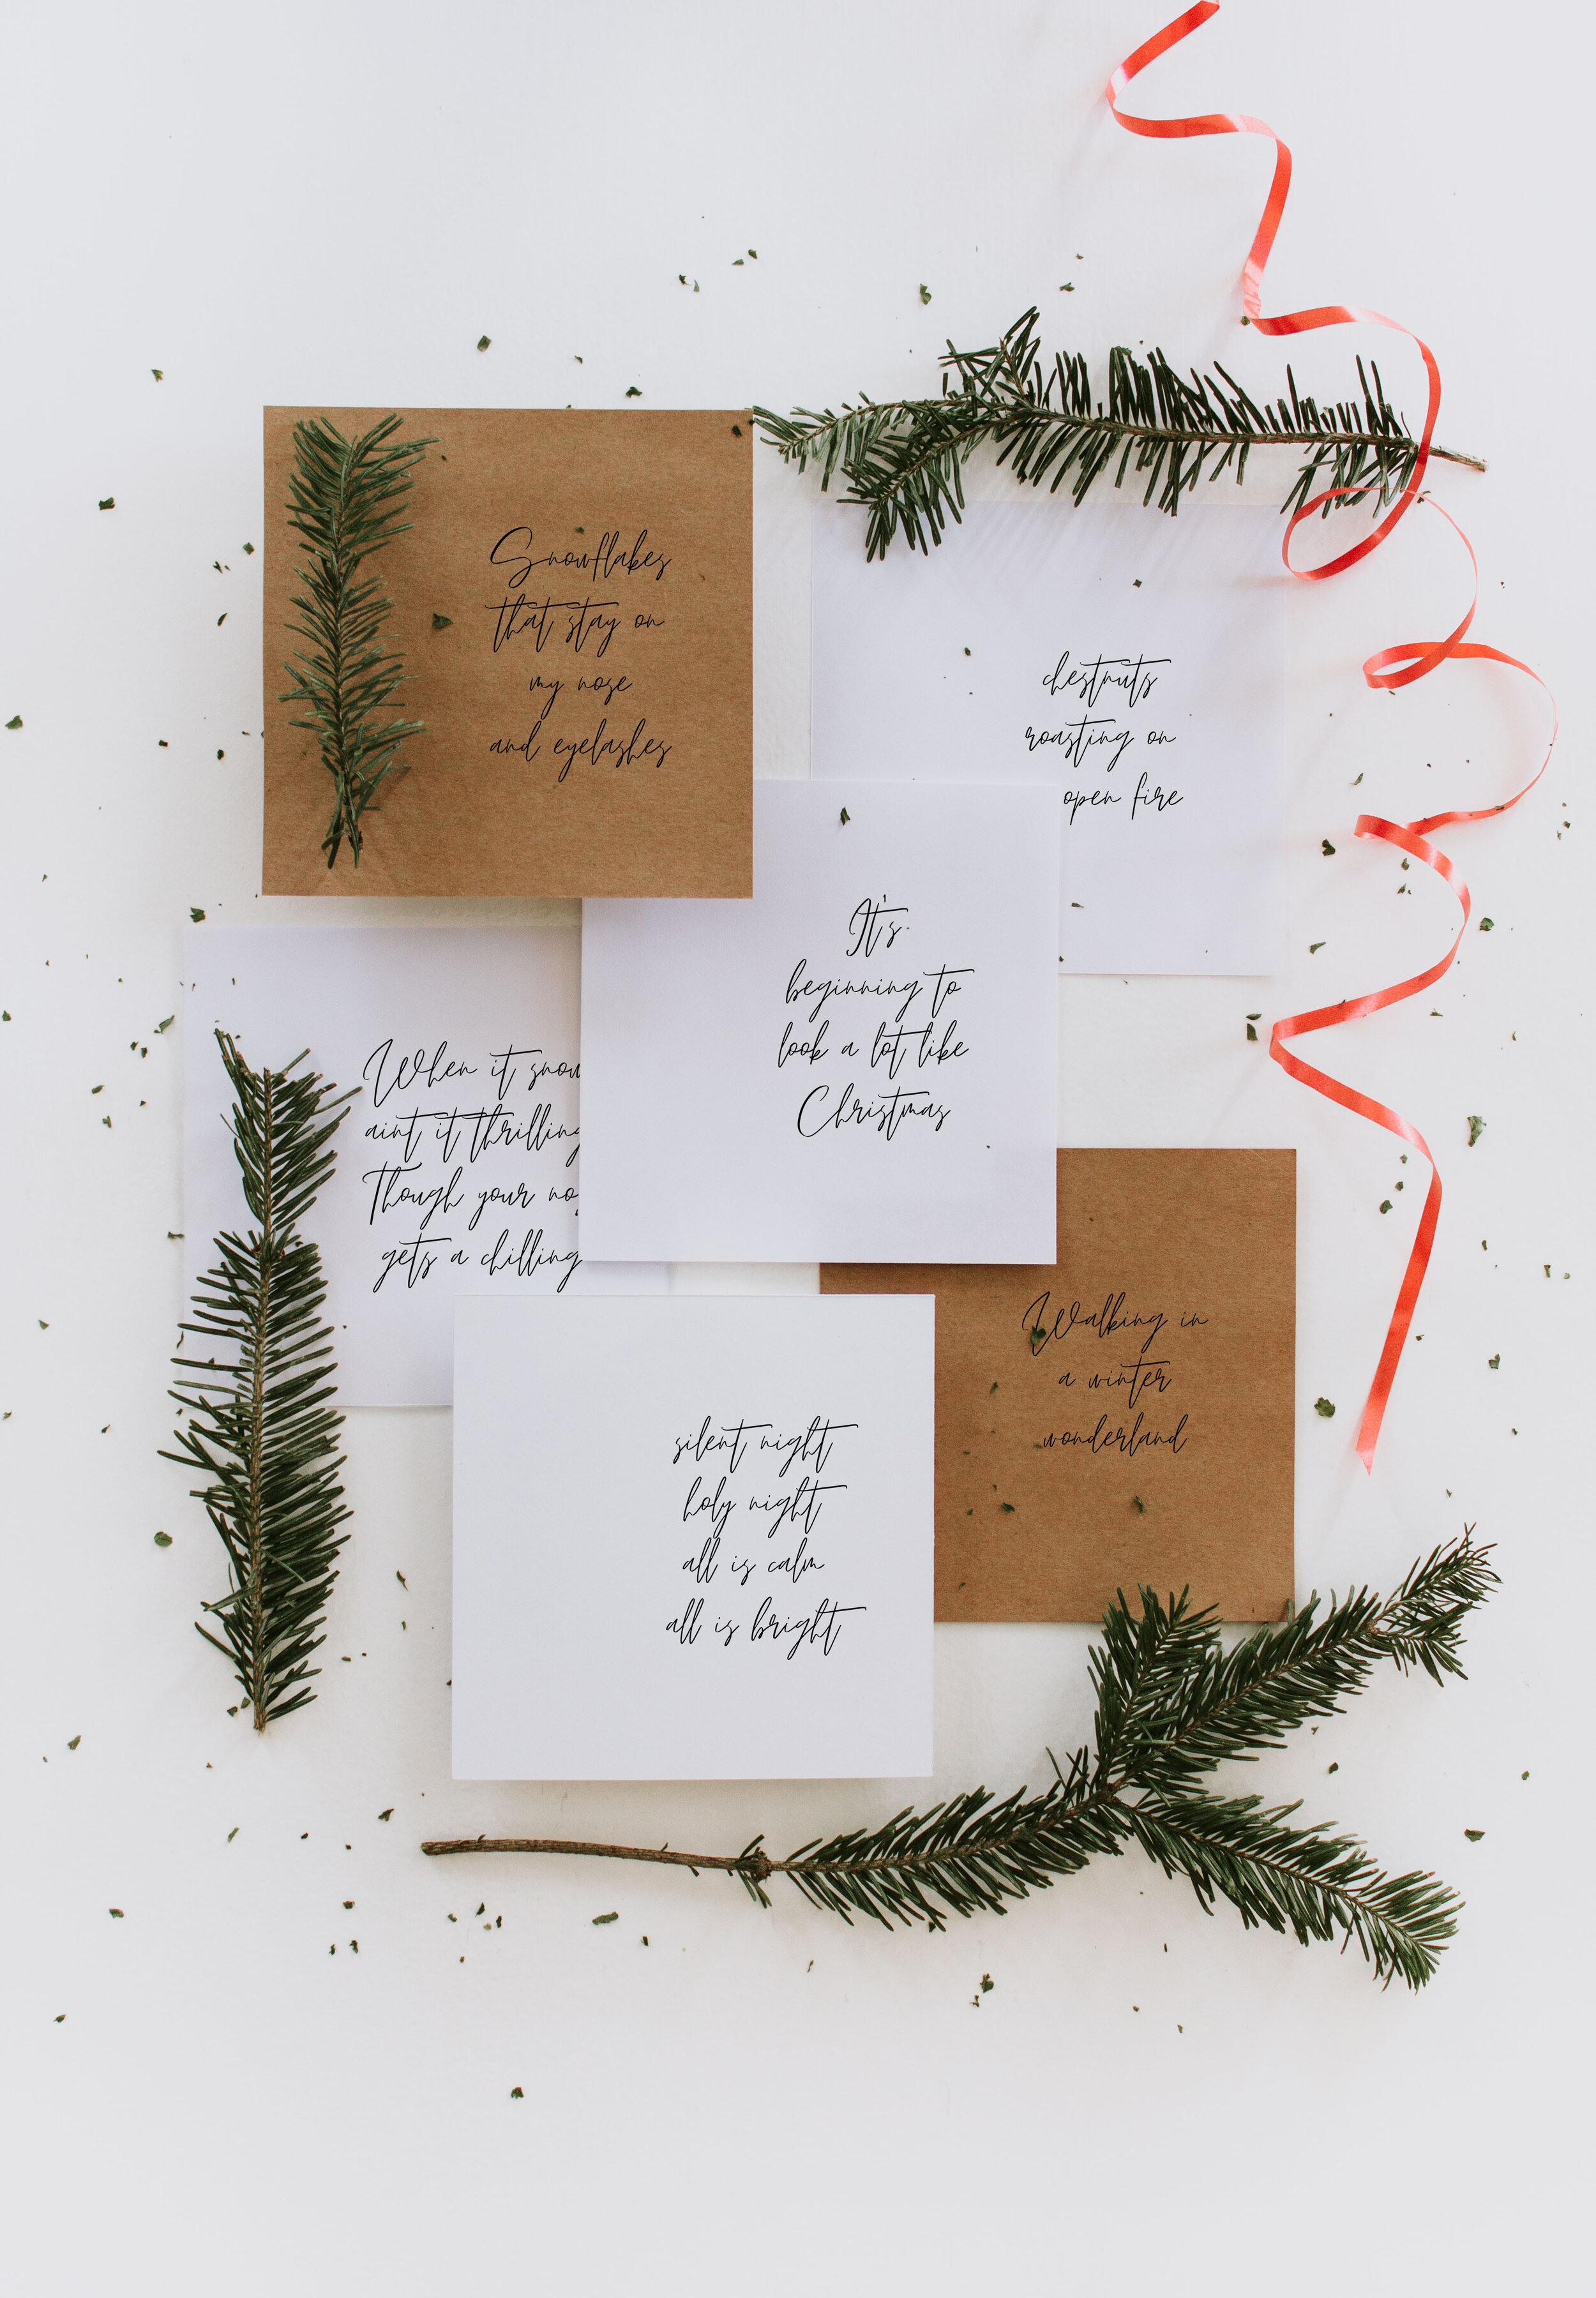 10 Free Christmas Place Cards - Christmas song lyrics made into place setting cards by Nadine Stay. Download and print these holiday prints from home